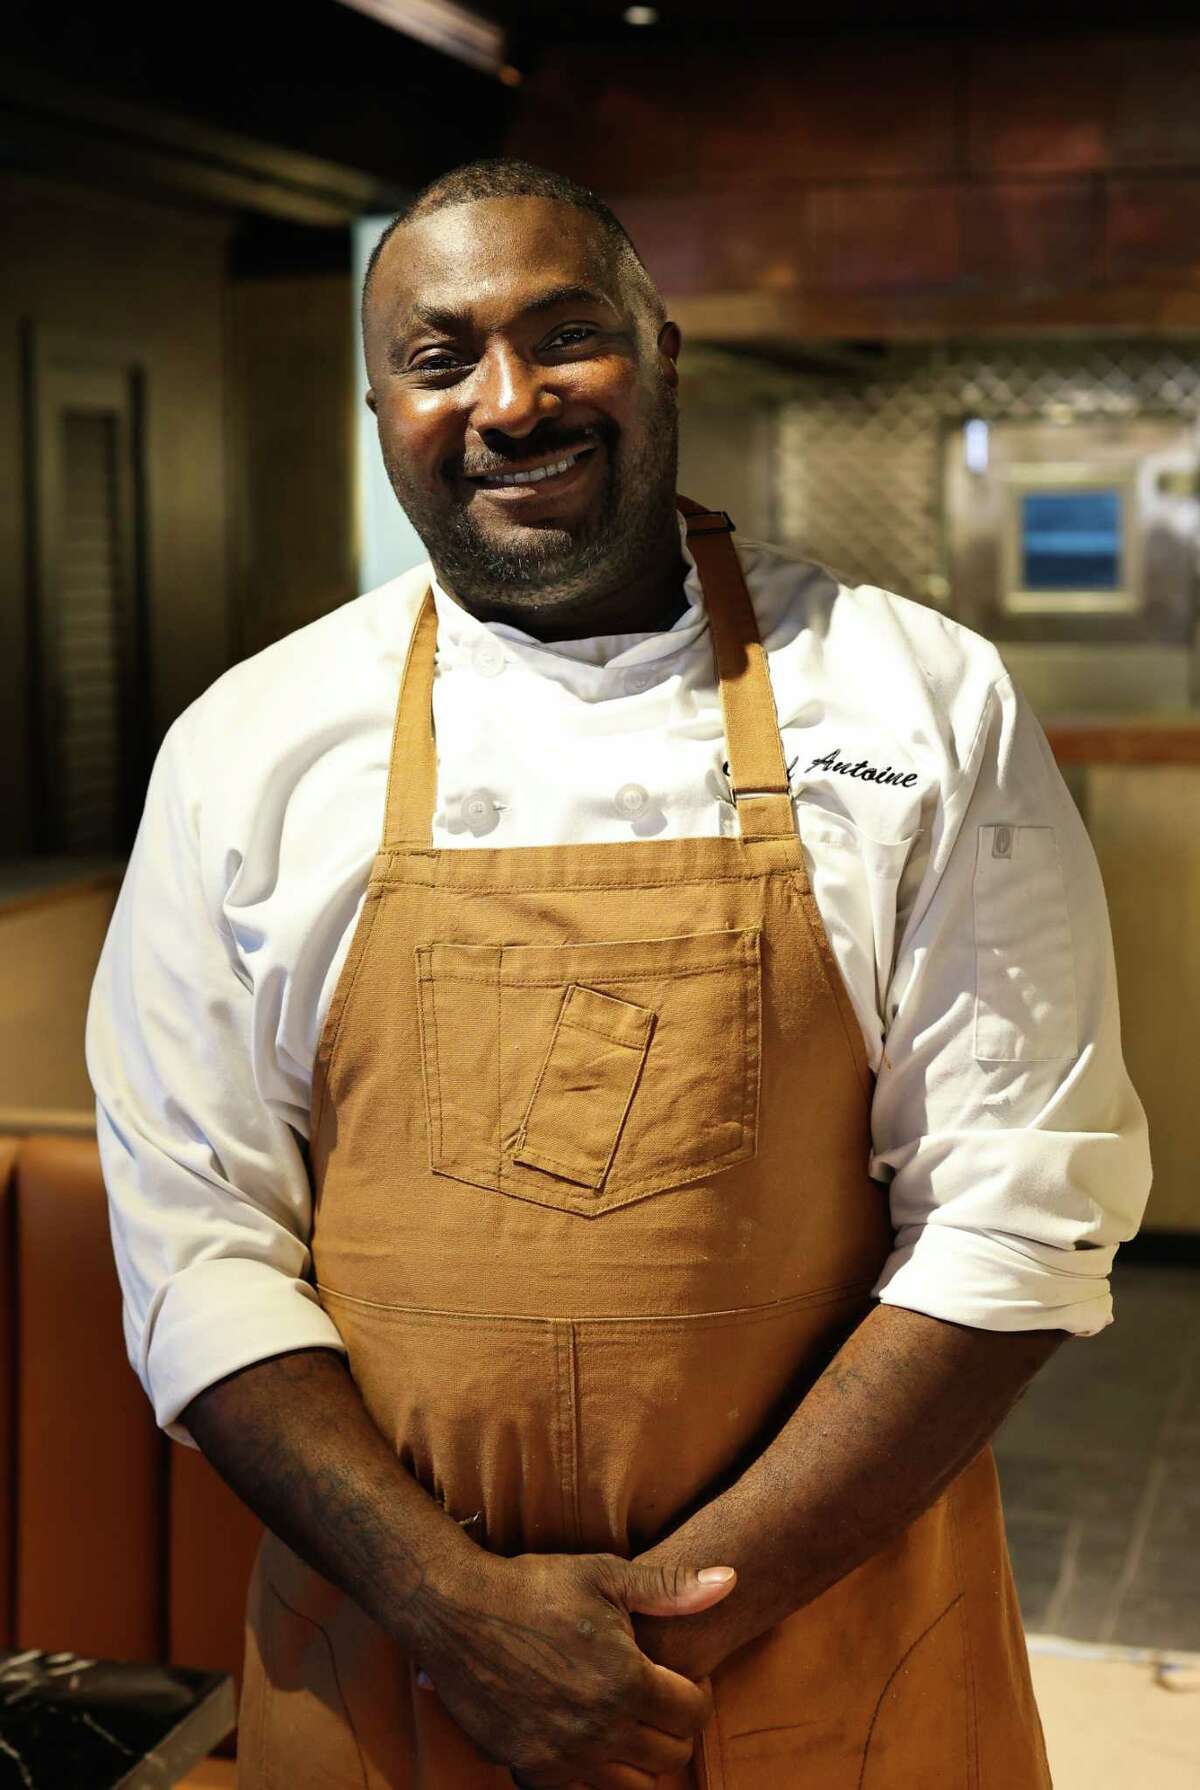 Chef Antoine Ware returns to the Houston restaurant scene with the opening of The Warwick, a new upscale restaurant.